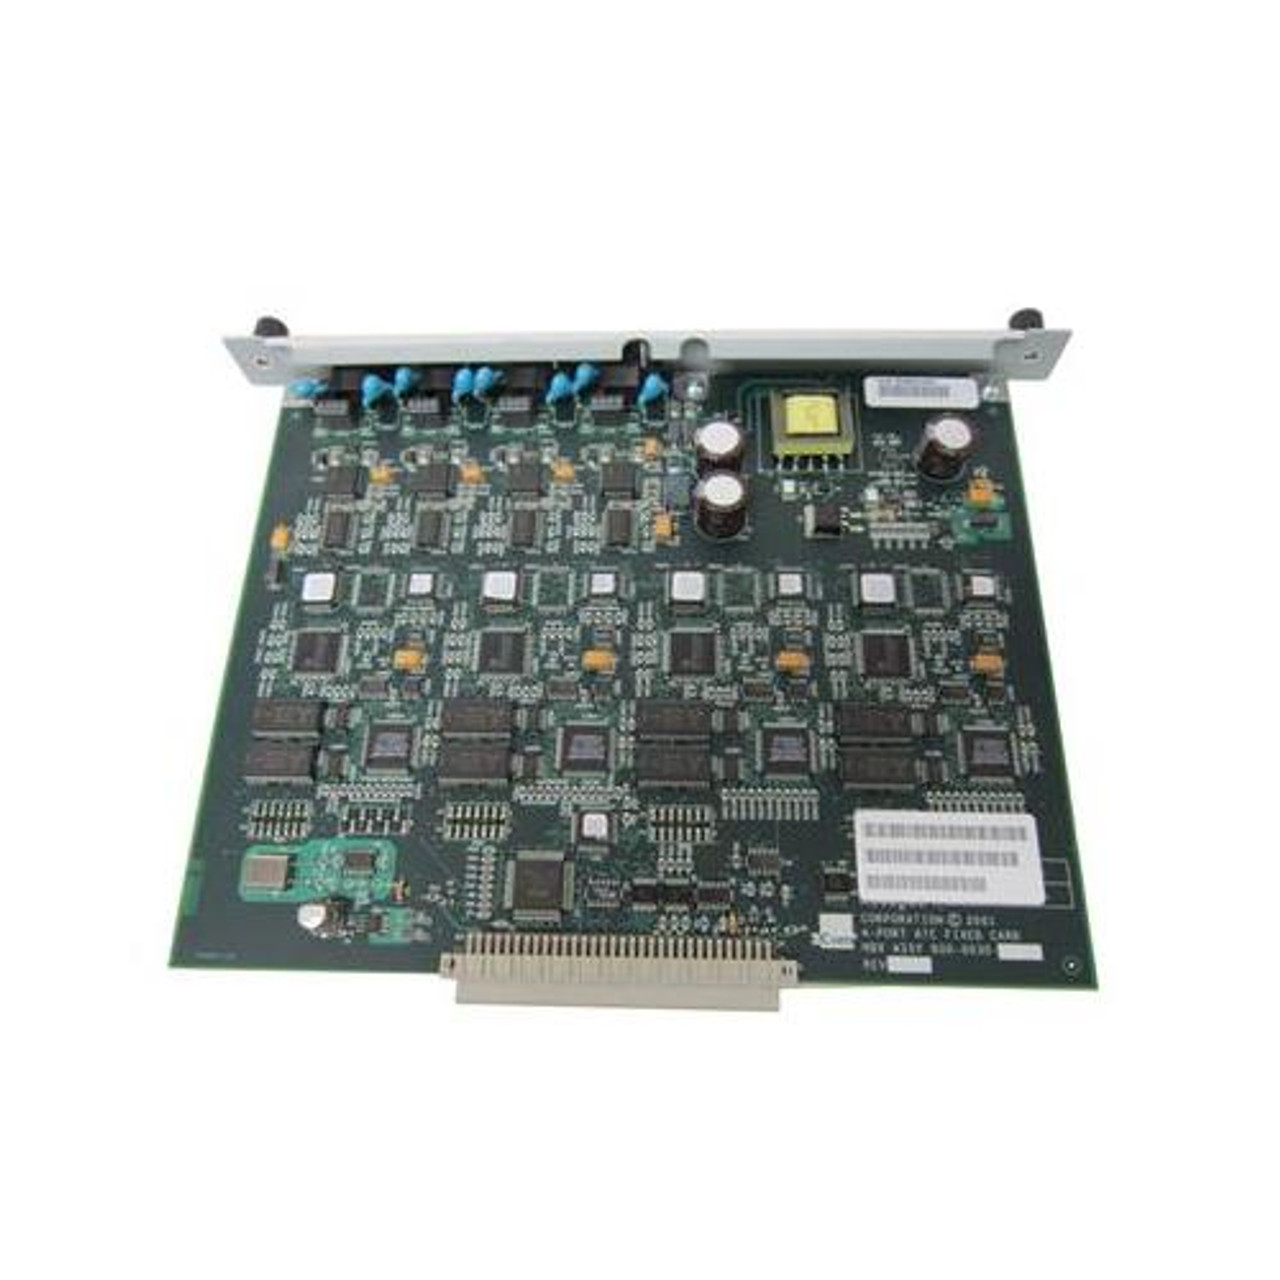 6900195701 3Com Total Control Chassis (Refurbished)